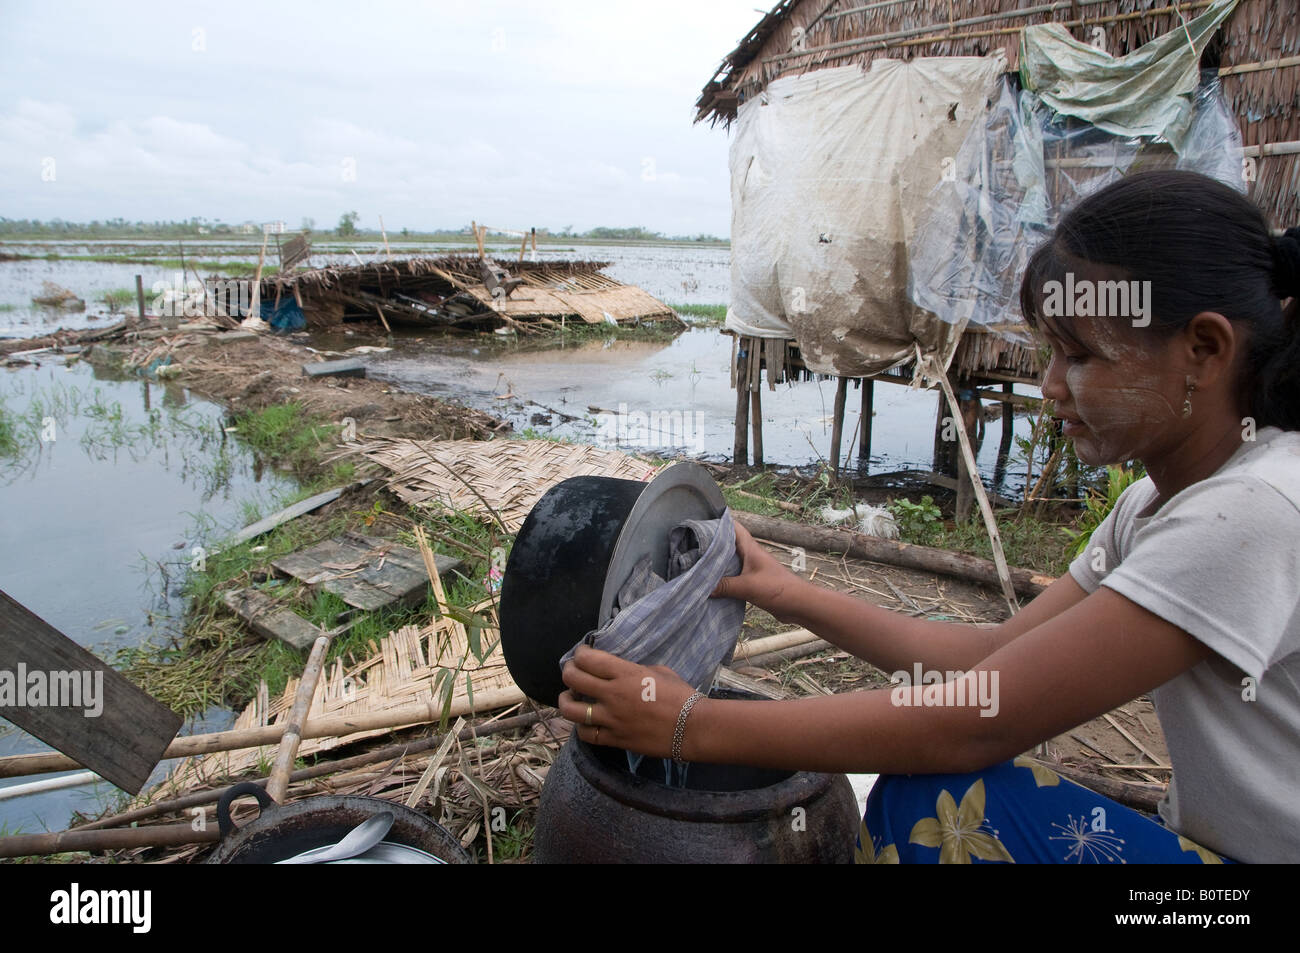 A villager cooks next to her home downed by Cyclone Nargis in a flooded rural area near Yangon Myanmar Stock Photo